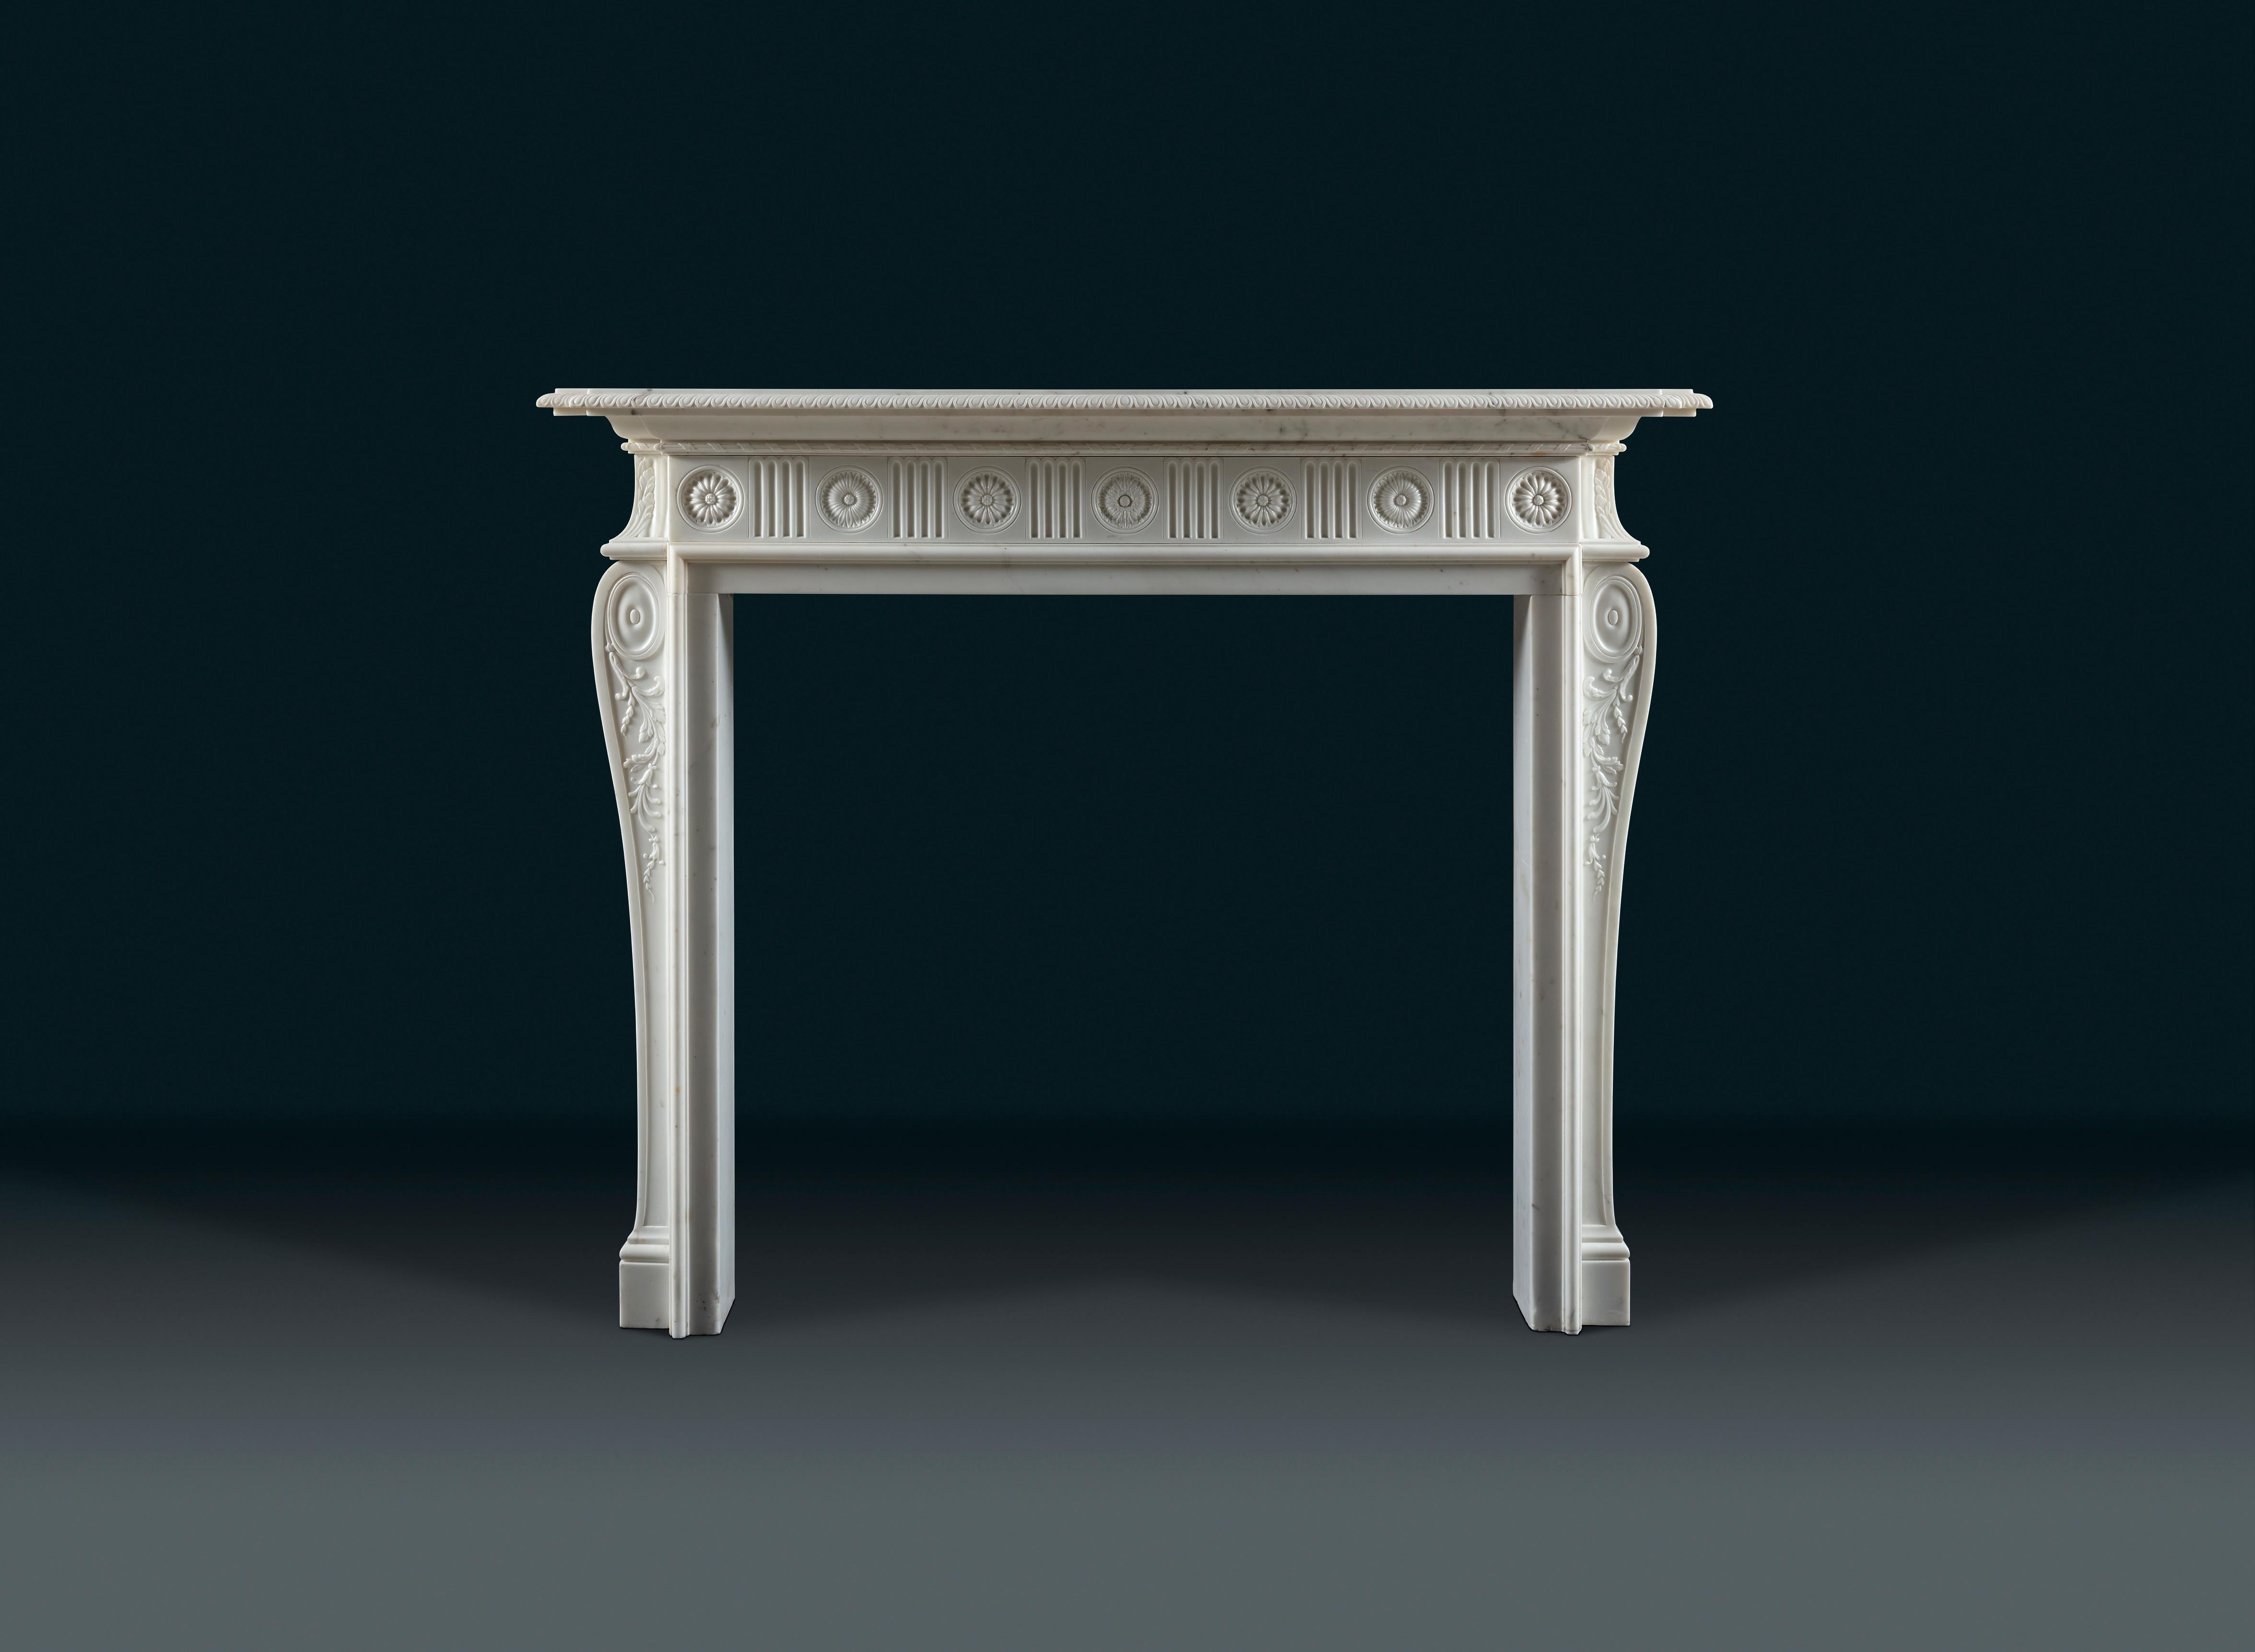 An extremely refined Adam period chimneypiece carved in white Statuary marble.
An elegant pie-crust shelf rests on the frieze, adorned with alternating floral paterae and finger flutes. Finely carved scrolls with delicate foliage decorate the side